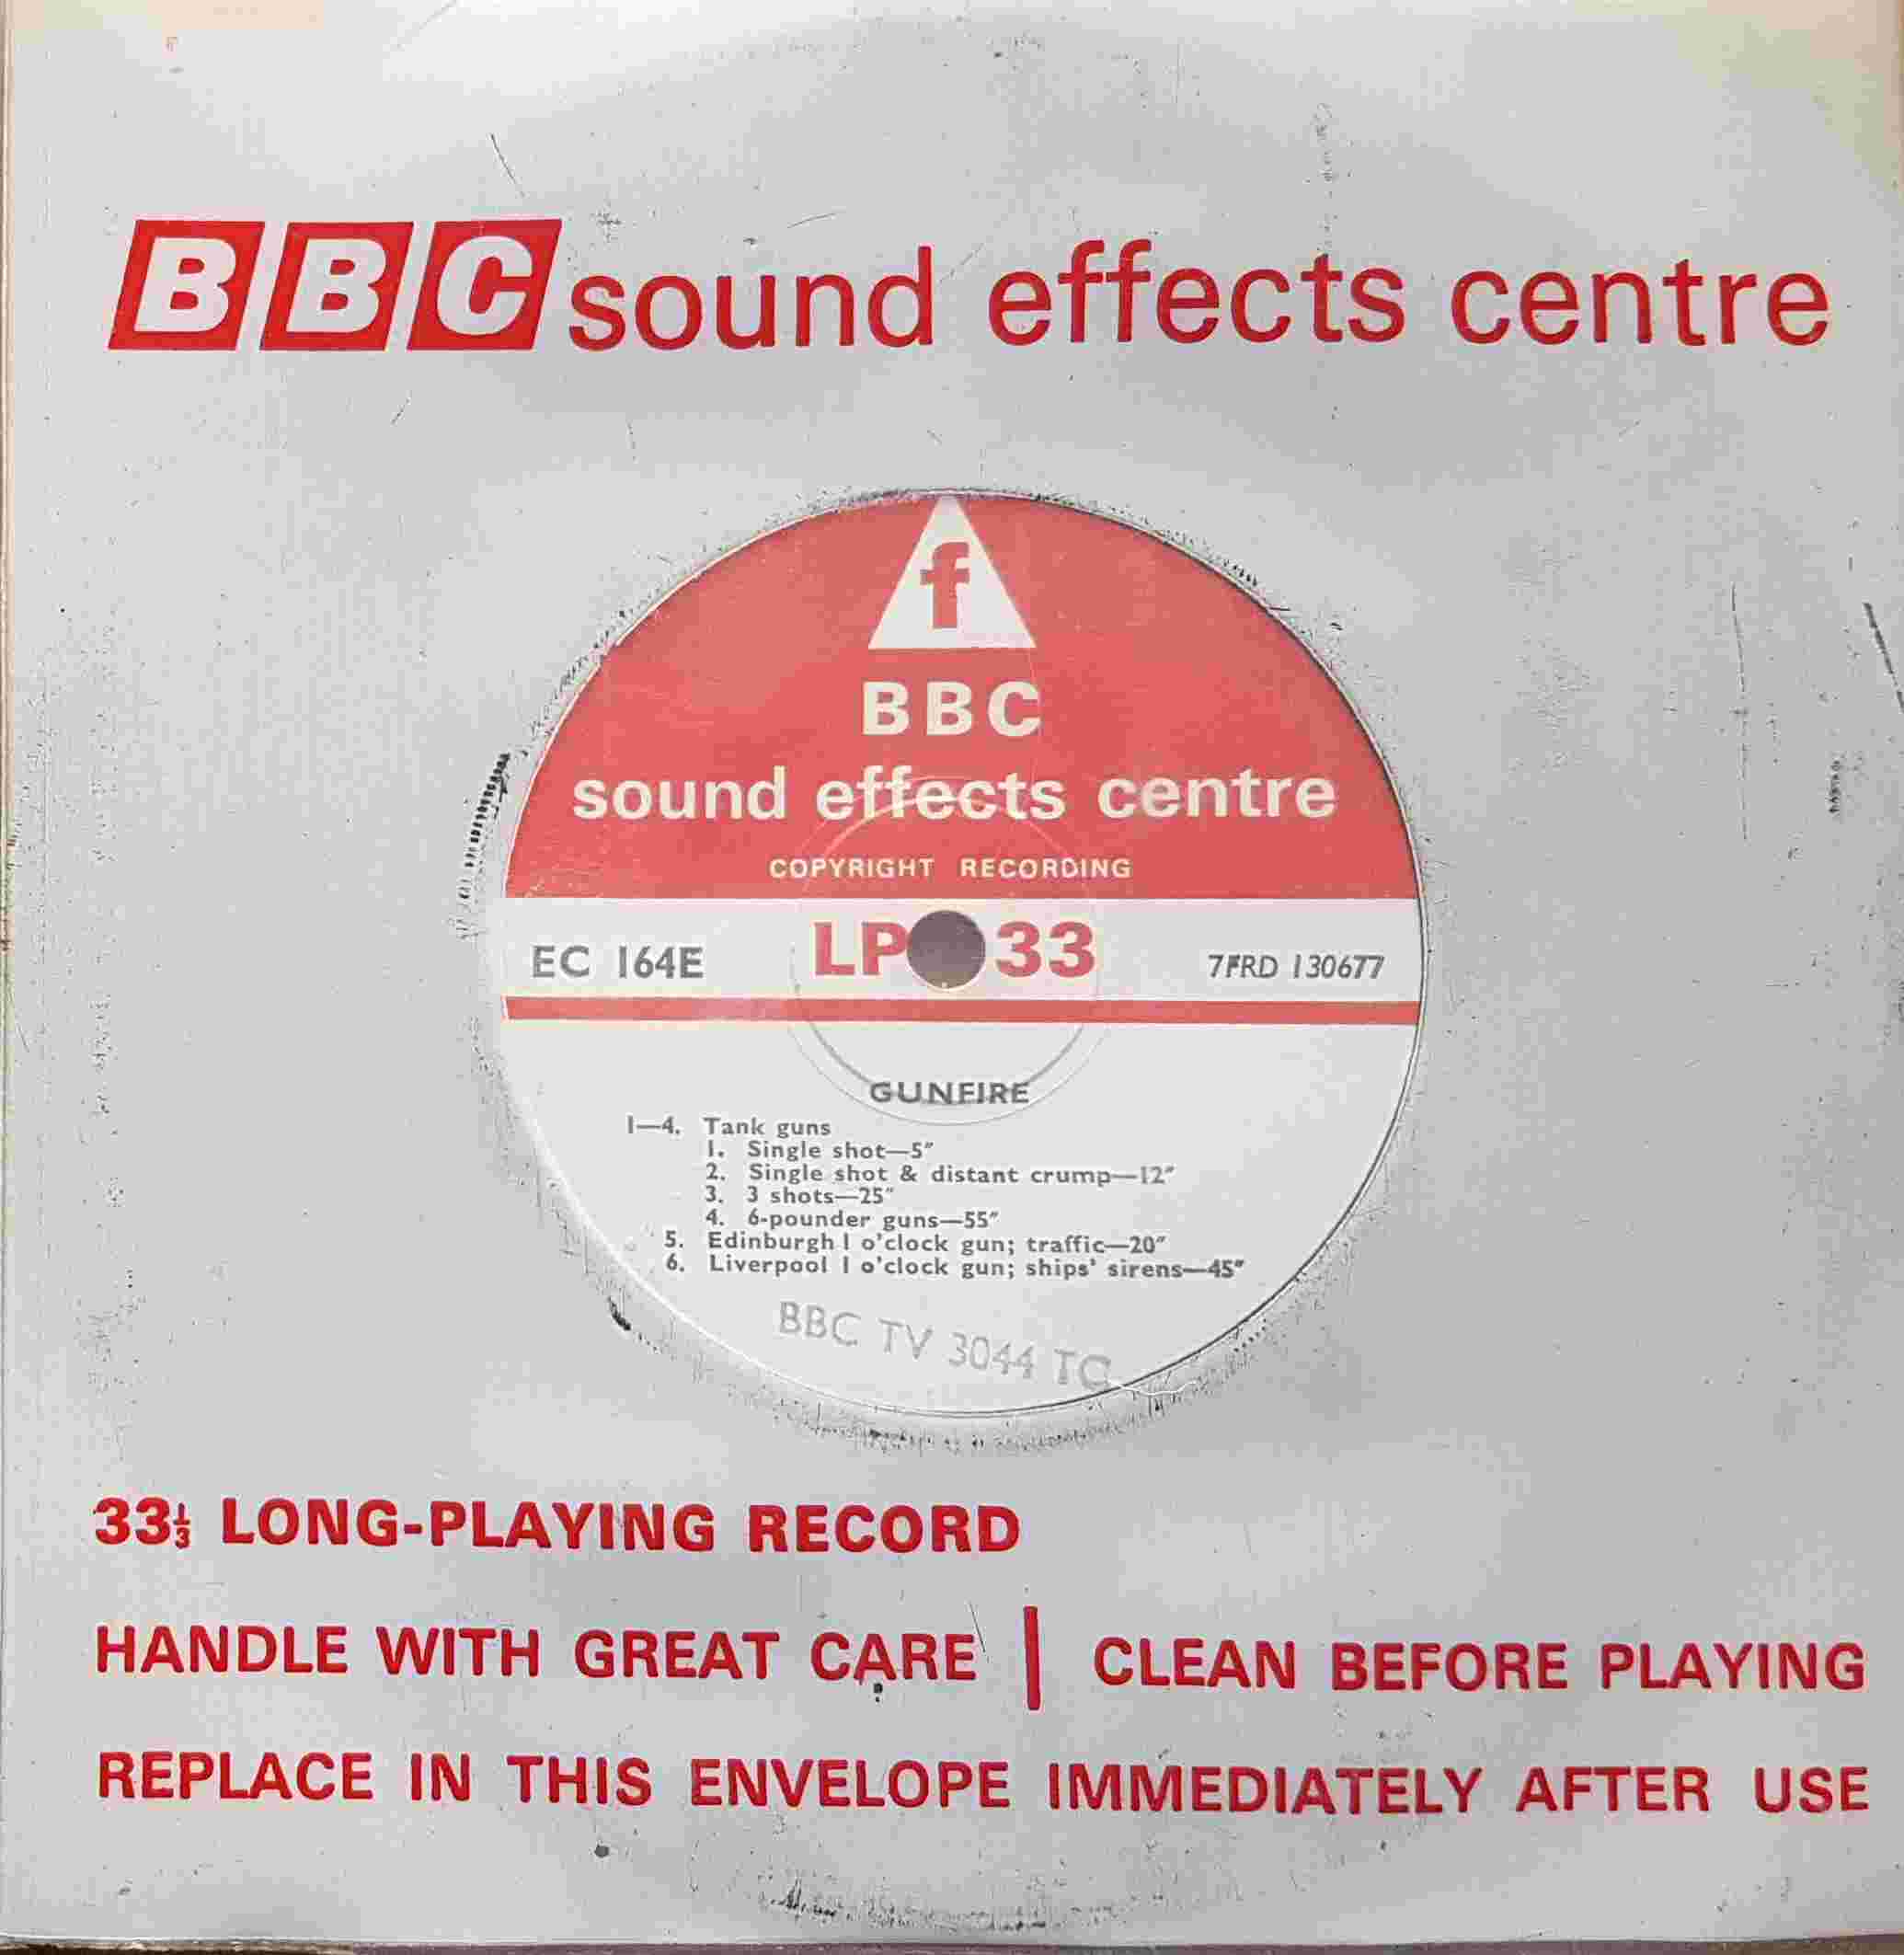 Picture of EC 164E Gunfire by artist Not registered from the BBC singles - Records and Tapes library